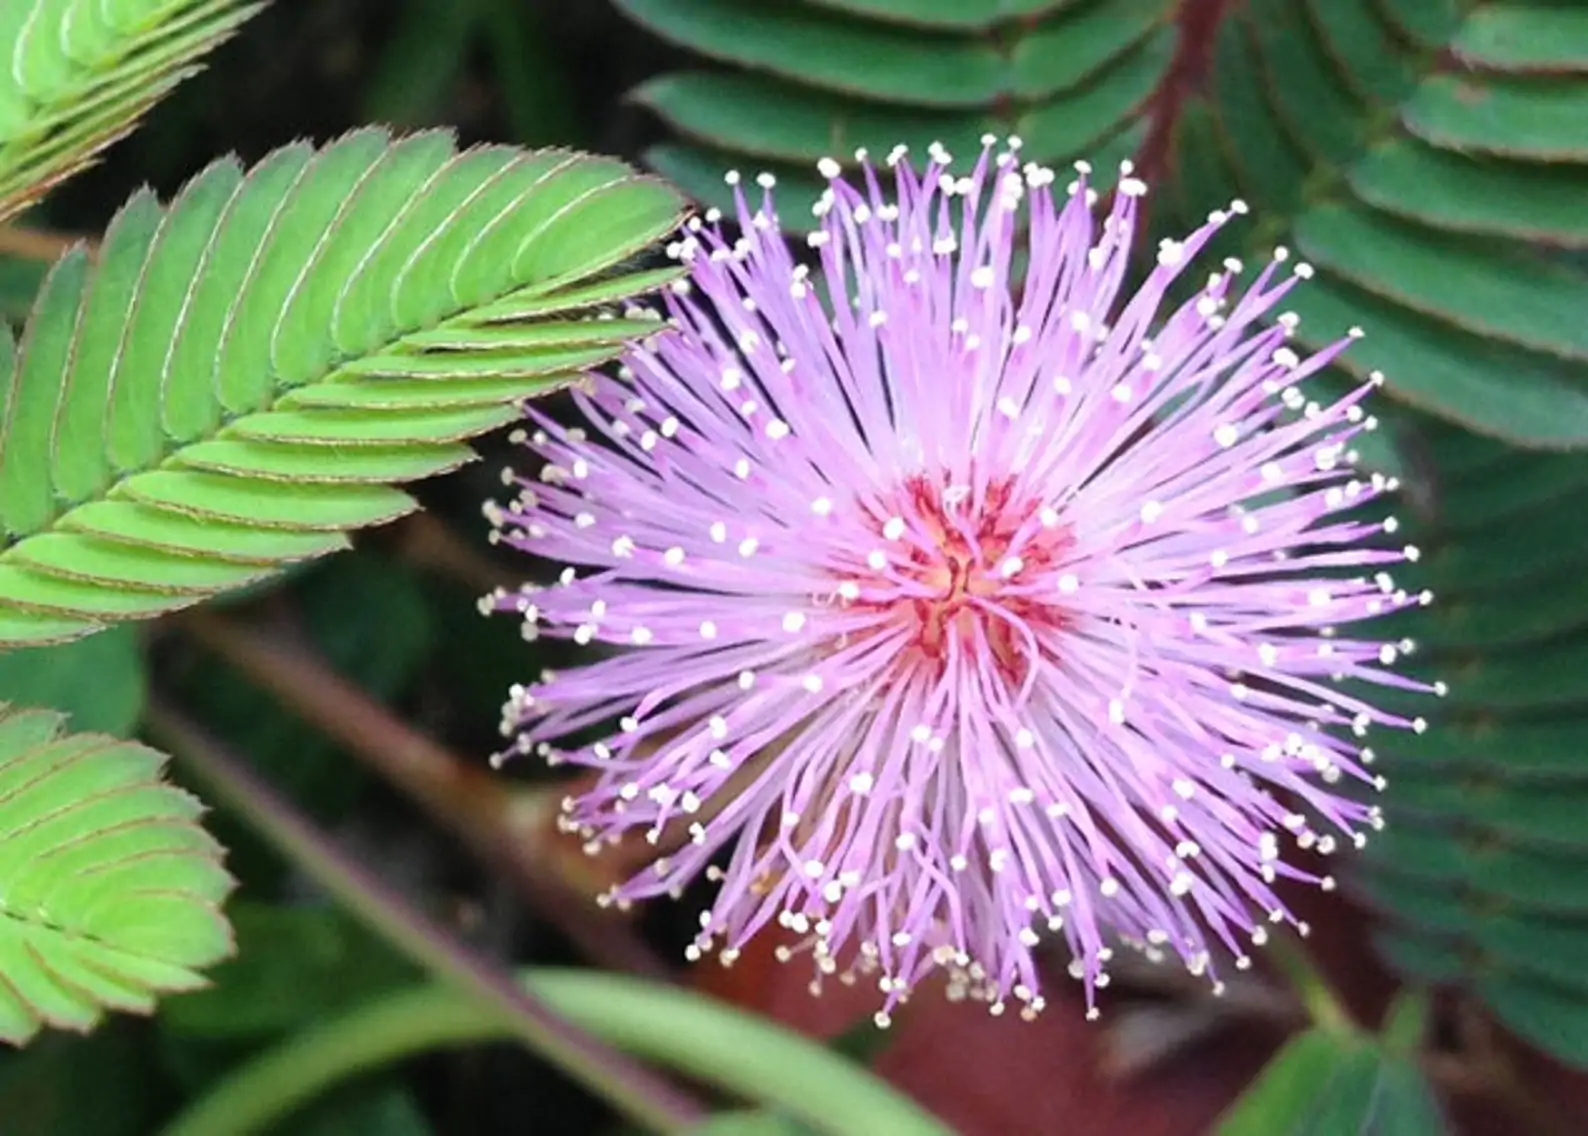 Purple Mimosa flower with green leaves in the background.